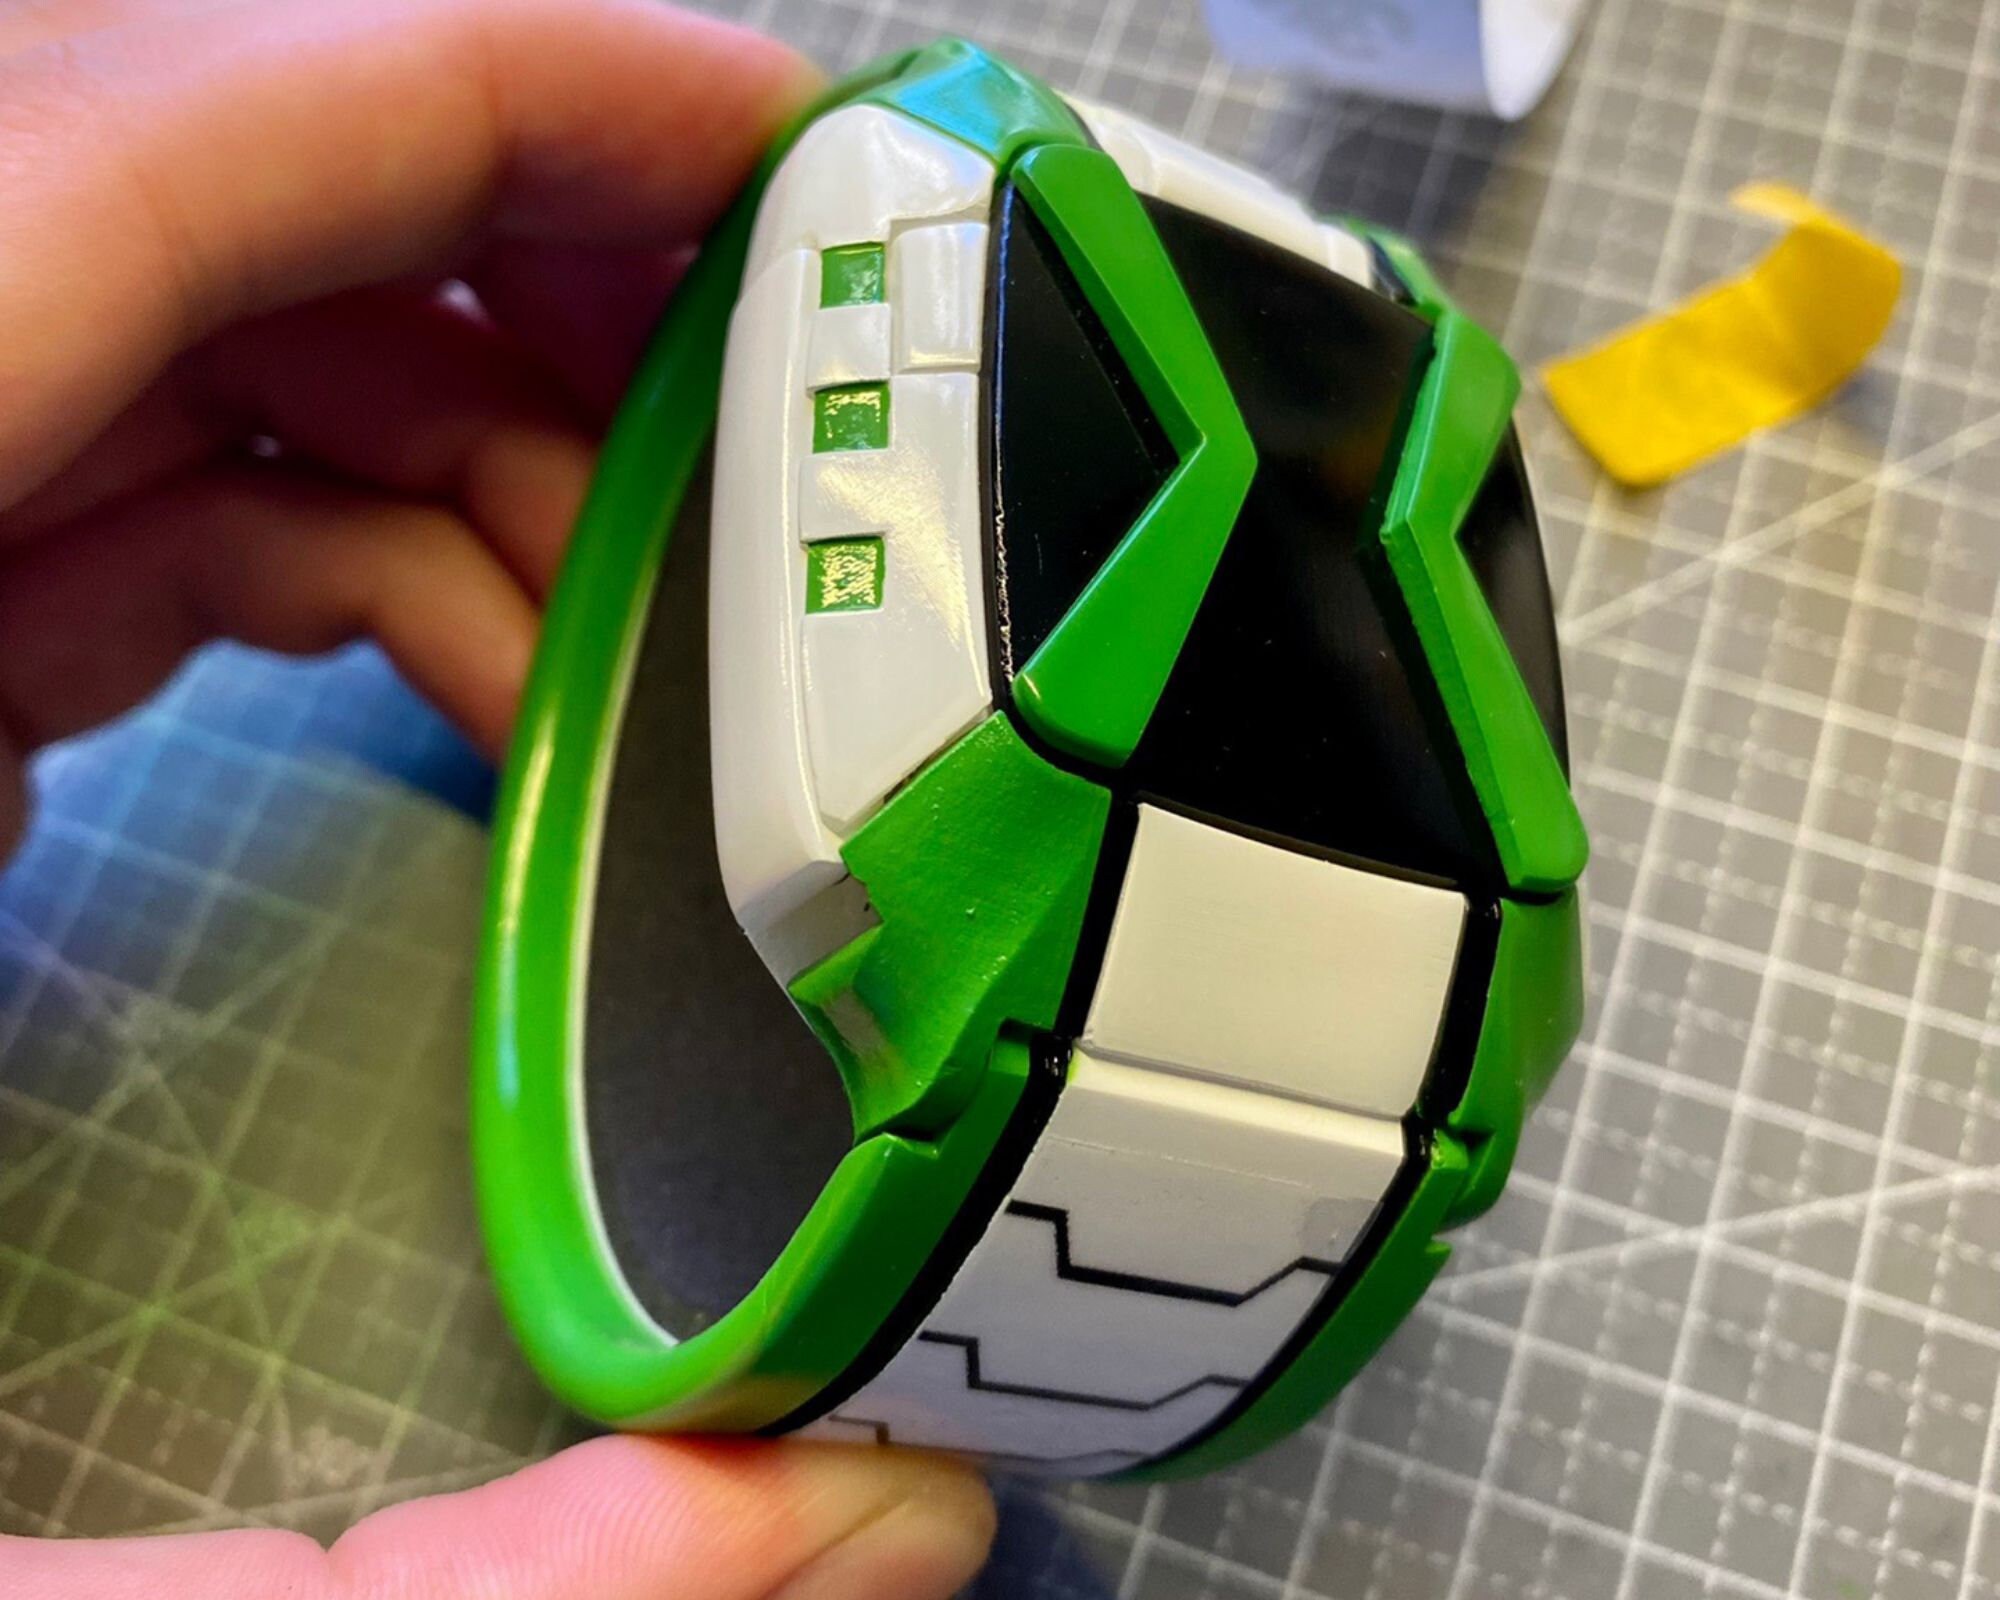 Ben 10 Omniverse Omnitrix Watchthe Dial is Rotatable and Has 